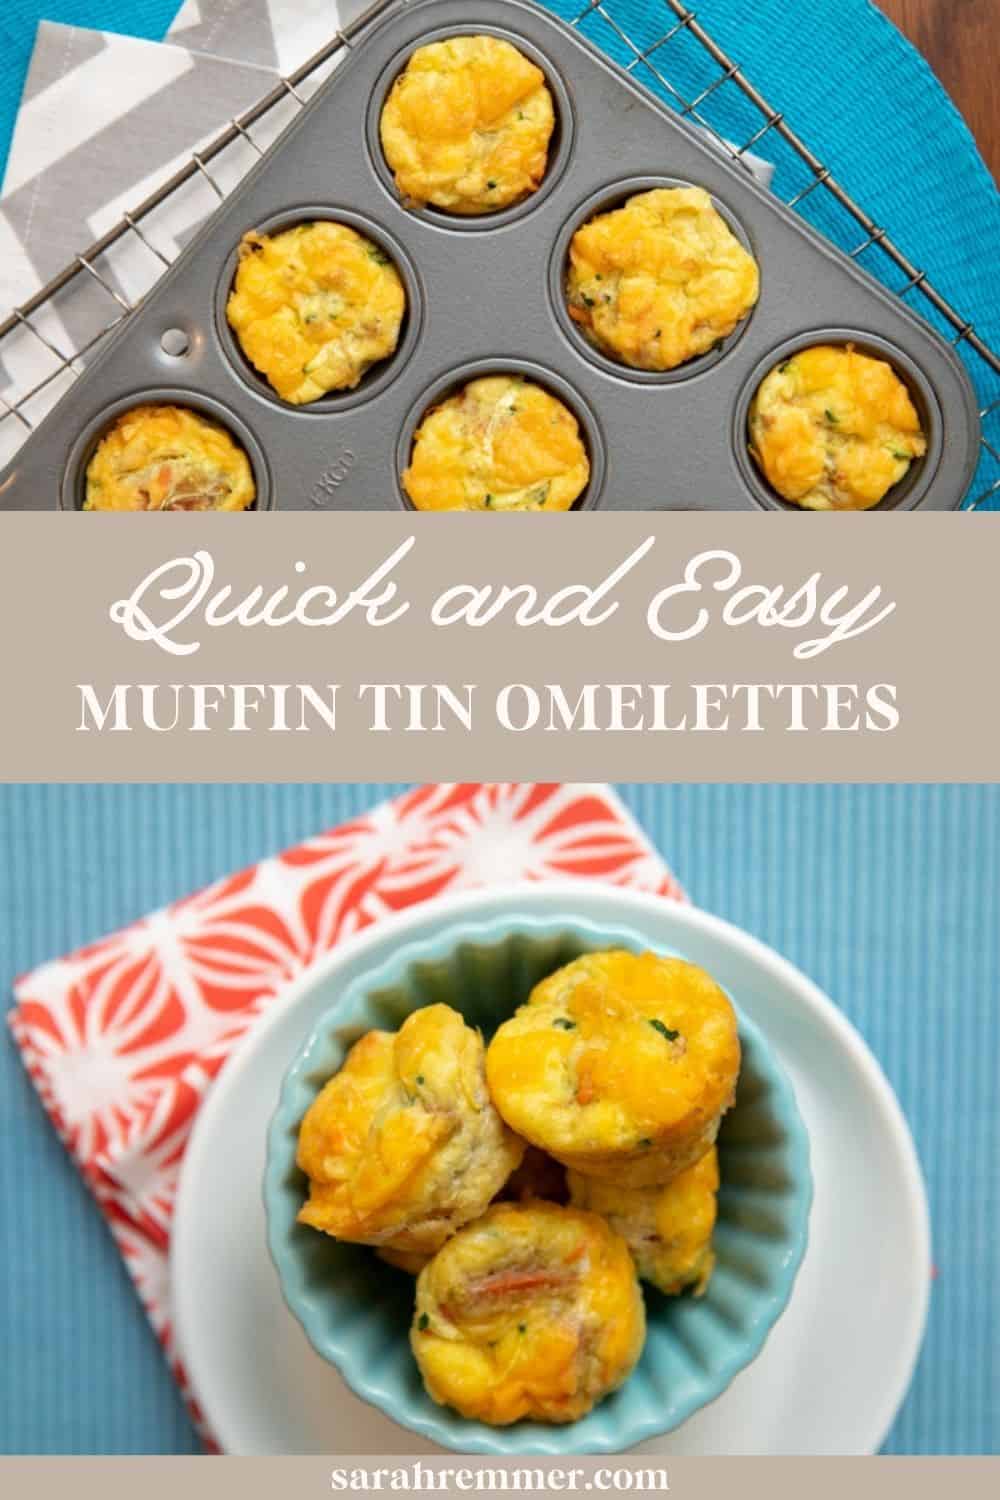 If you're as busy a Mom as I am, you'll love this quick and easy meal idea- perfect for breakfast, lunch or dinner. Give these muffin tin omelettes a go!